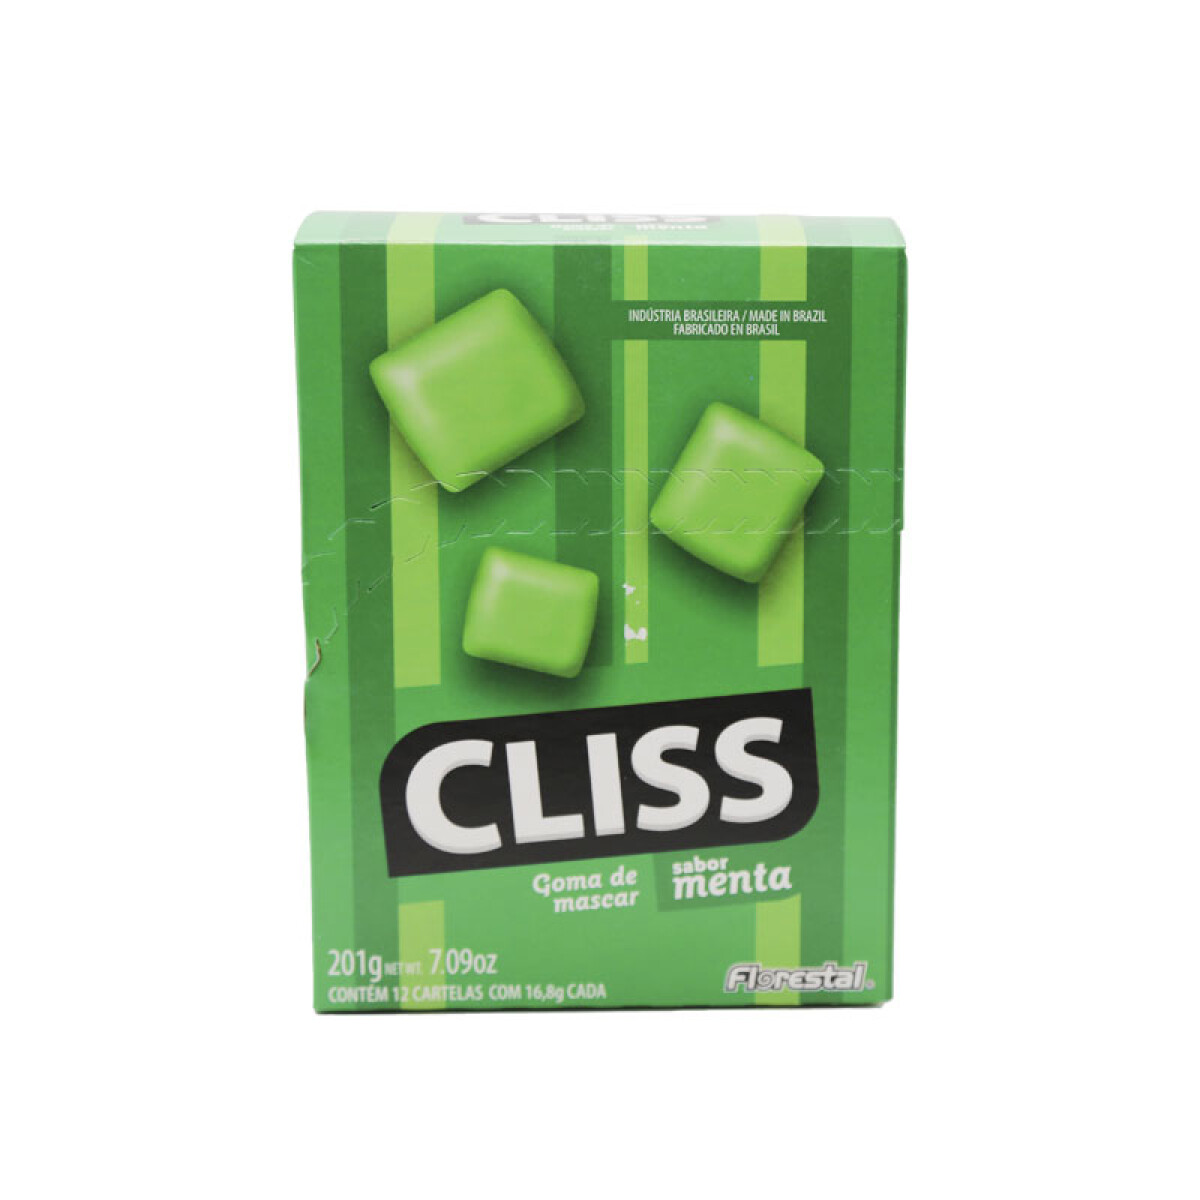 Chicle CLISS BLISTER 12pcs 201grs - Menta 